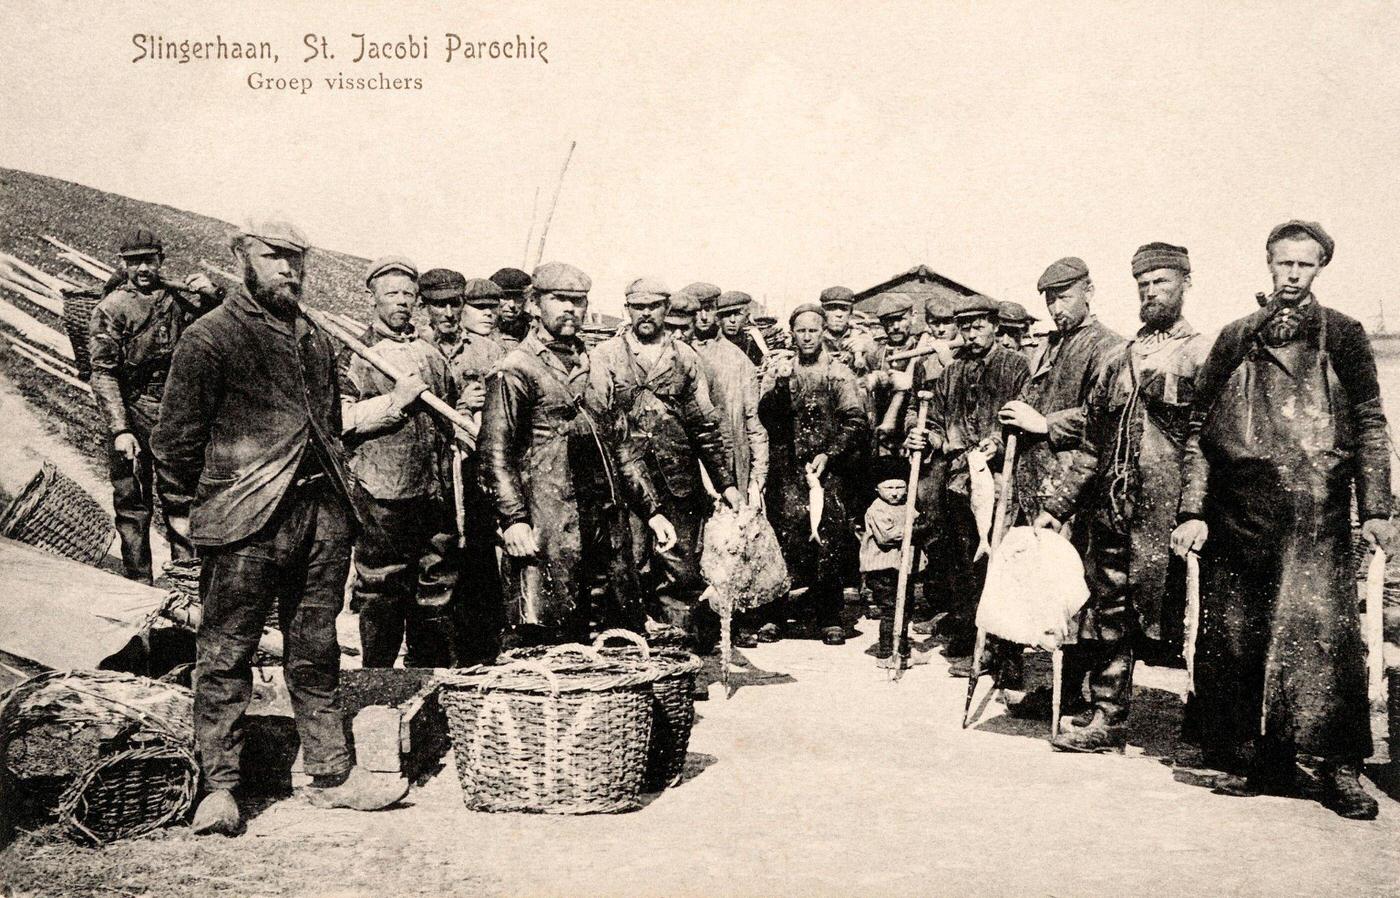 Dutch fishermen with their baskets and implements in Slingerhaan, Netherlands, 1907